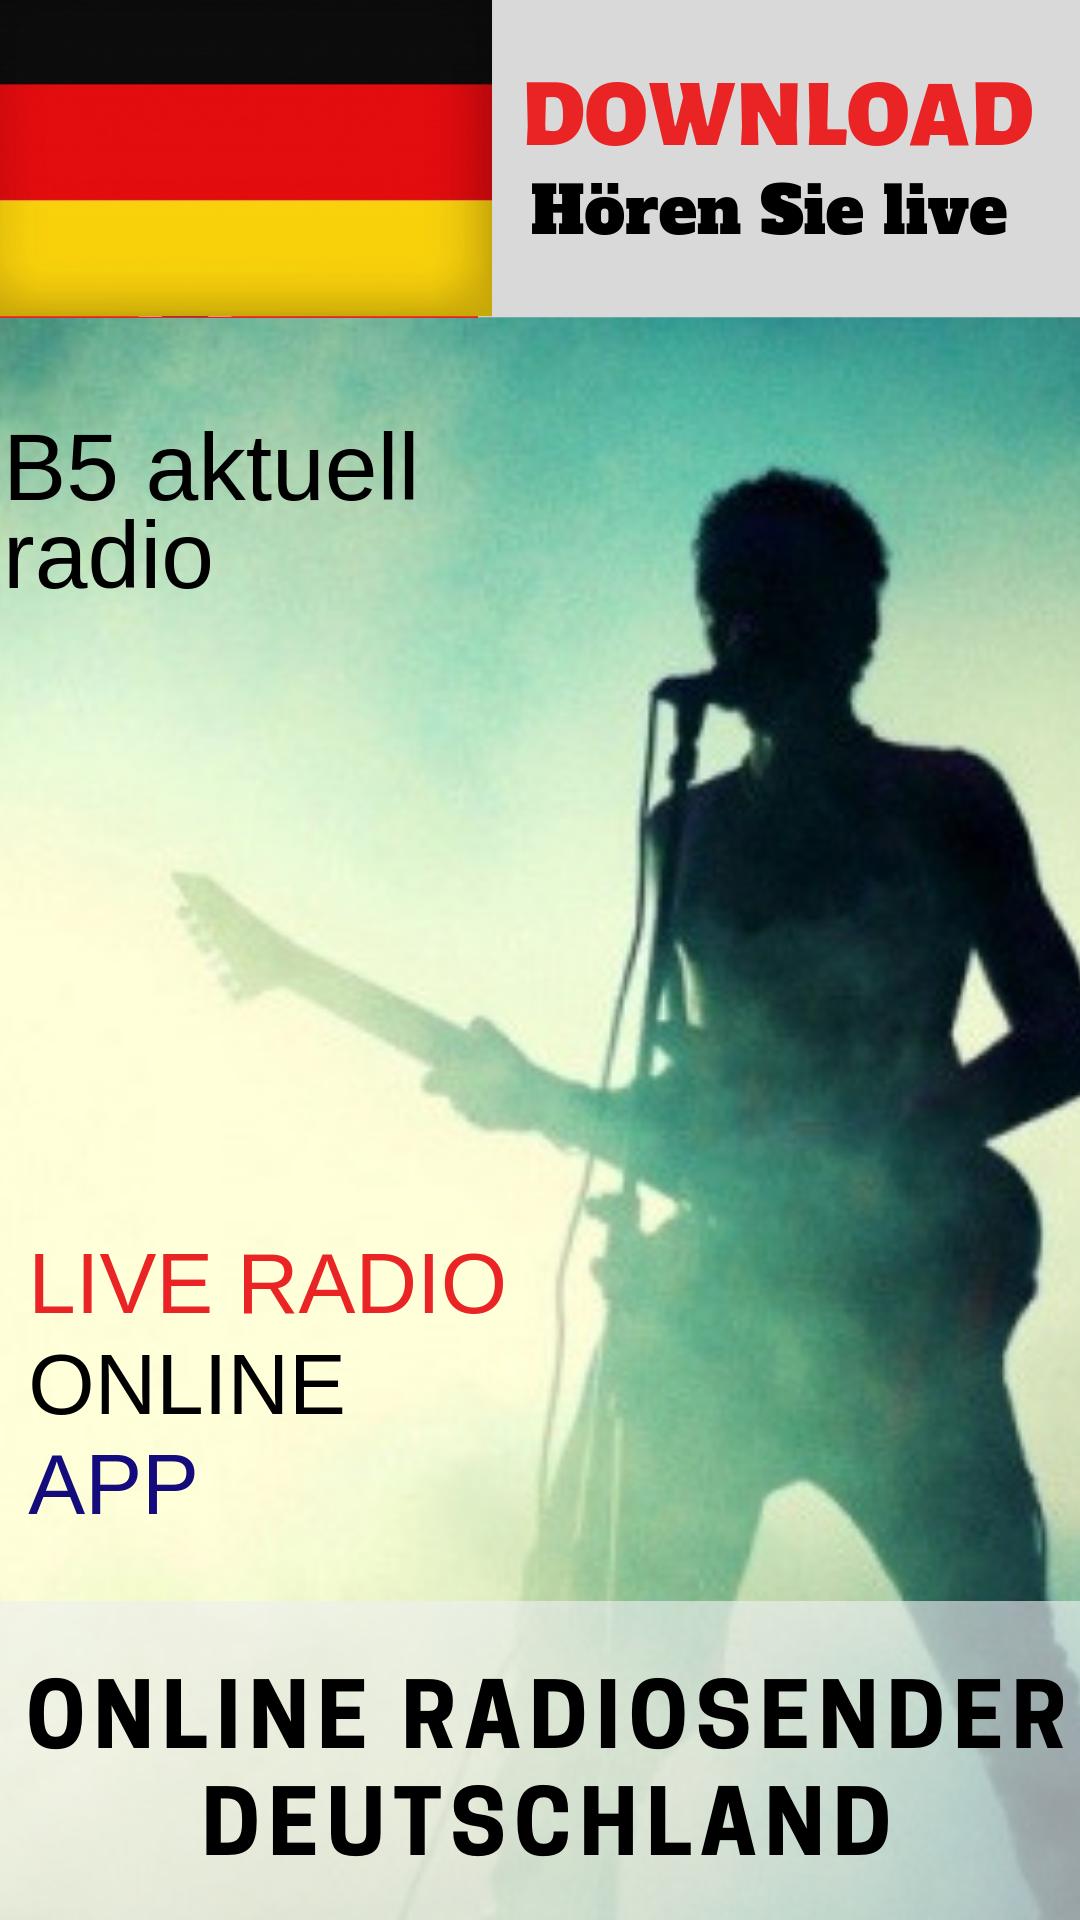 B5 aktuell radio for Android - APK Download